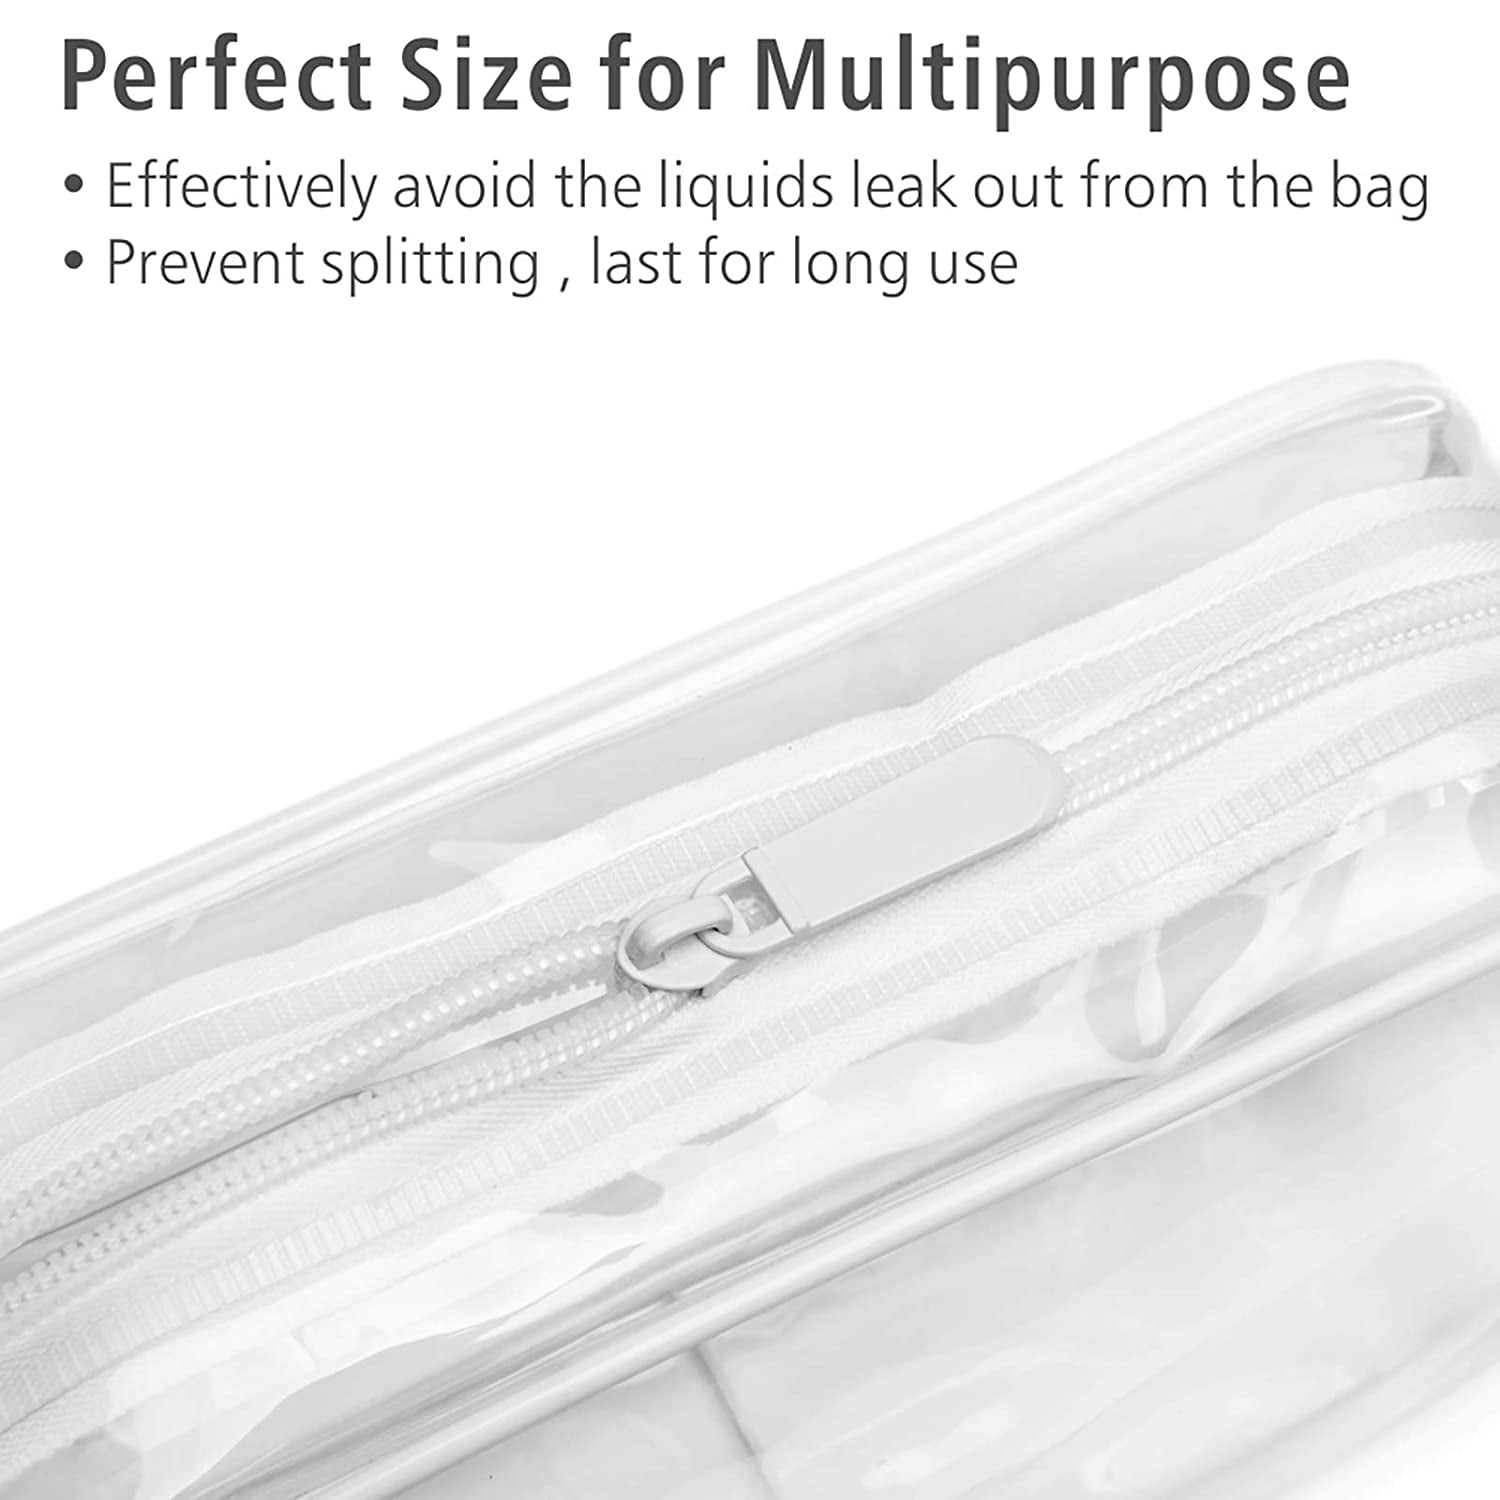 CGBE TSA Approved Travel Toiletry bag, Clear Toiletry Bag, 2 Pack  Multipurpose Transparent TSA Travel Bag Airport Airline Compliant Quart  Size Bags